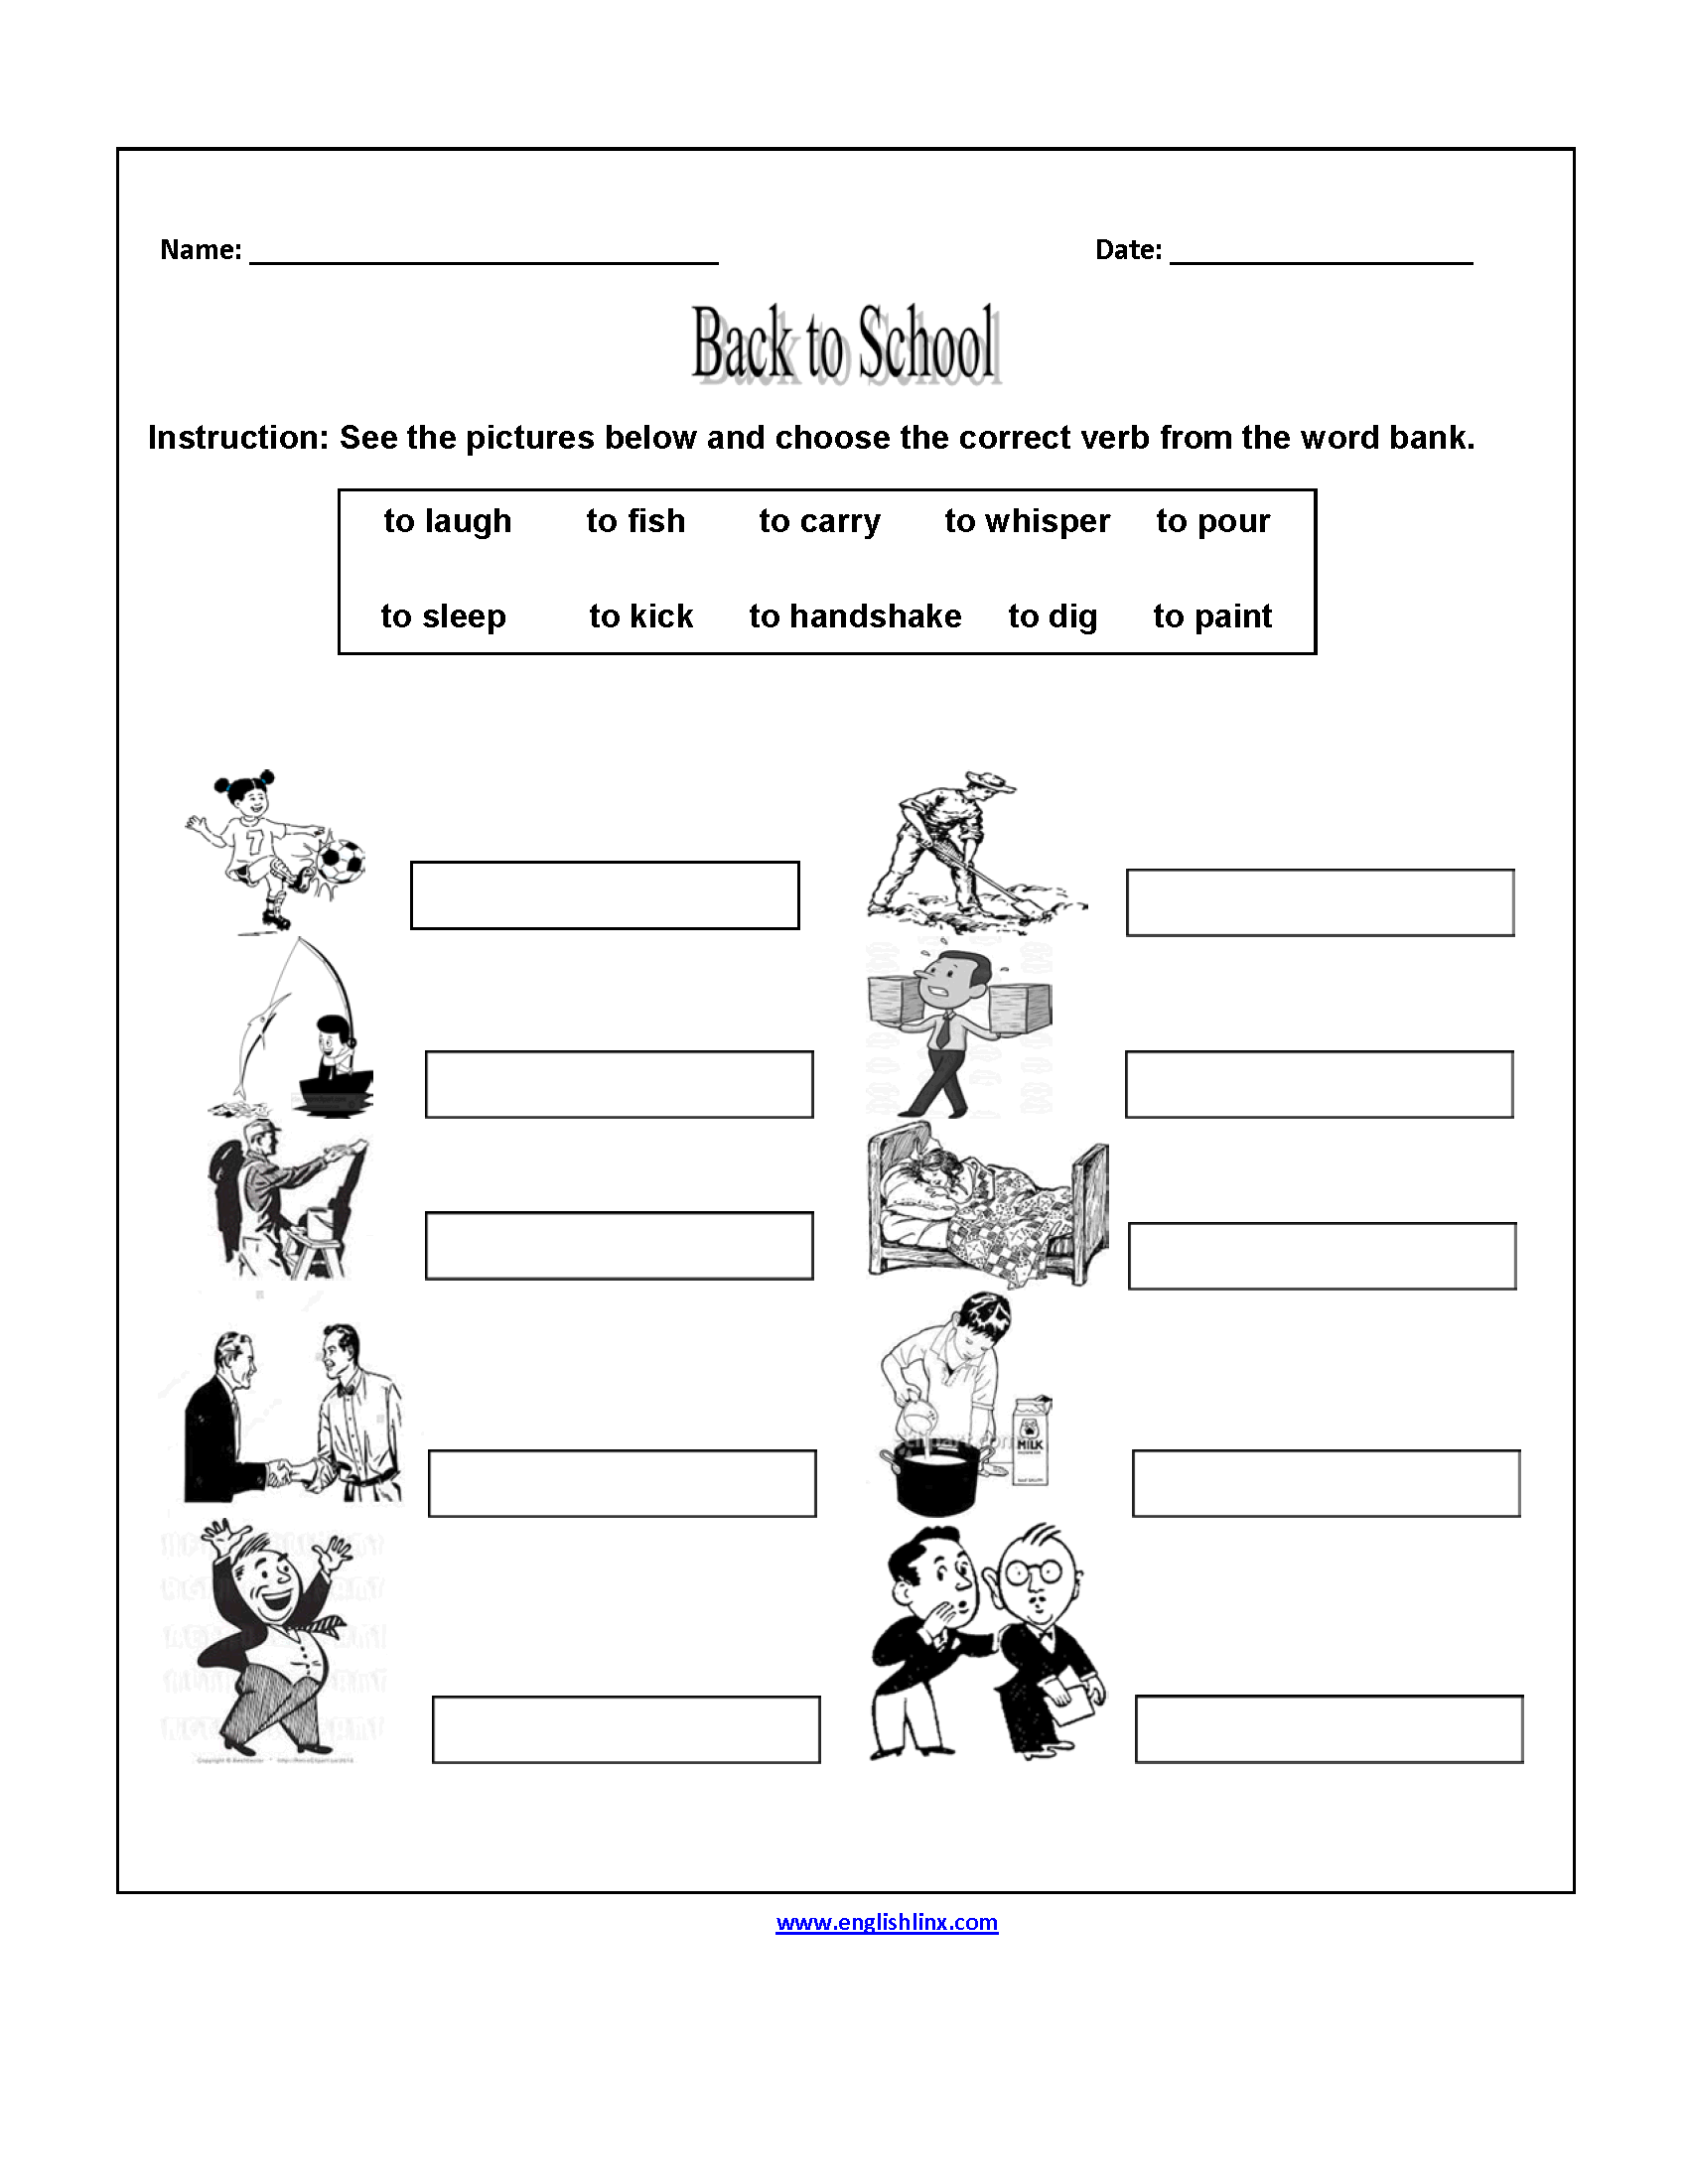 back-to-school-worksheets-choose-the-verbs-back-to-school-worksheets